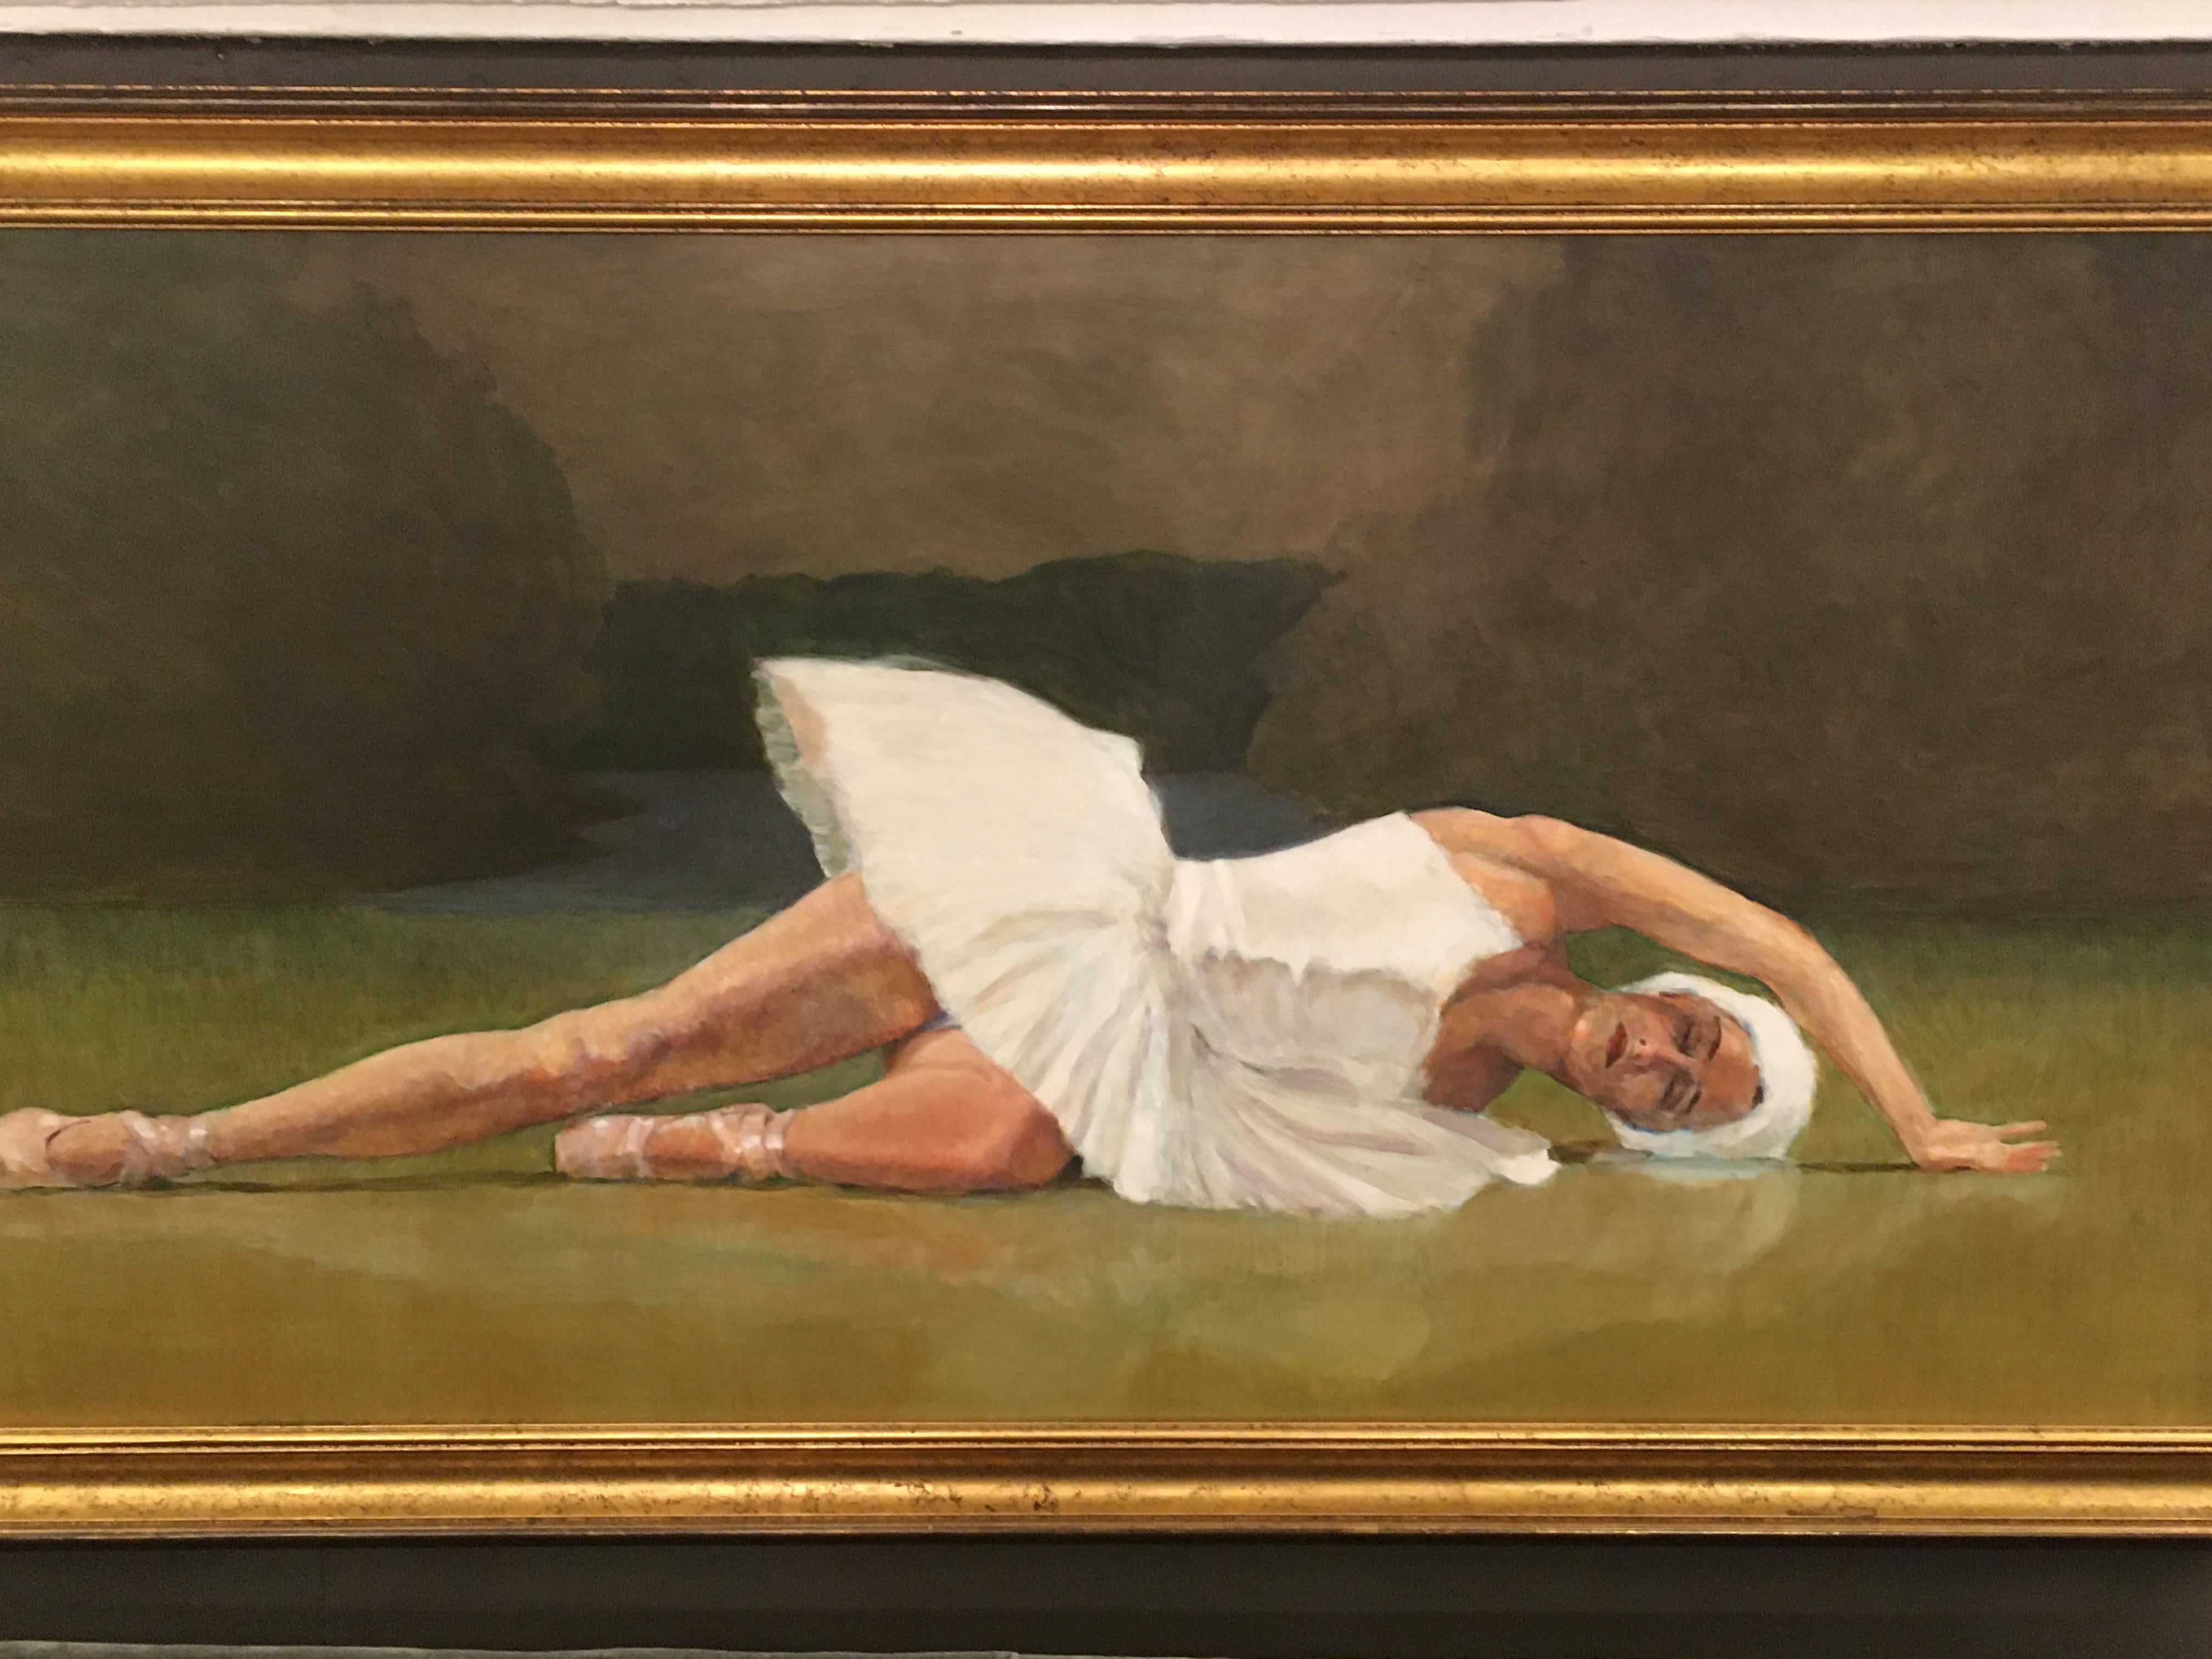 Beautifully rendered oil on board by renowned Bucks County artist, Robert Beck. Subject is a lovely ballerina in white tutu in repose. Frame is bronze giltwood and compliments the color palette of greens, brown, grey and white.